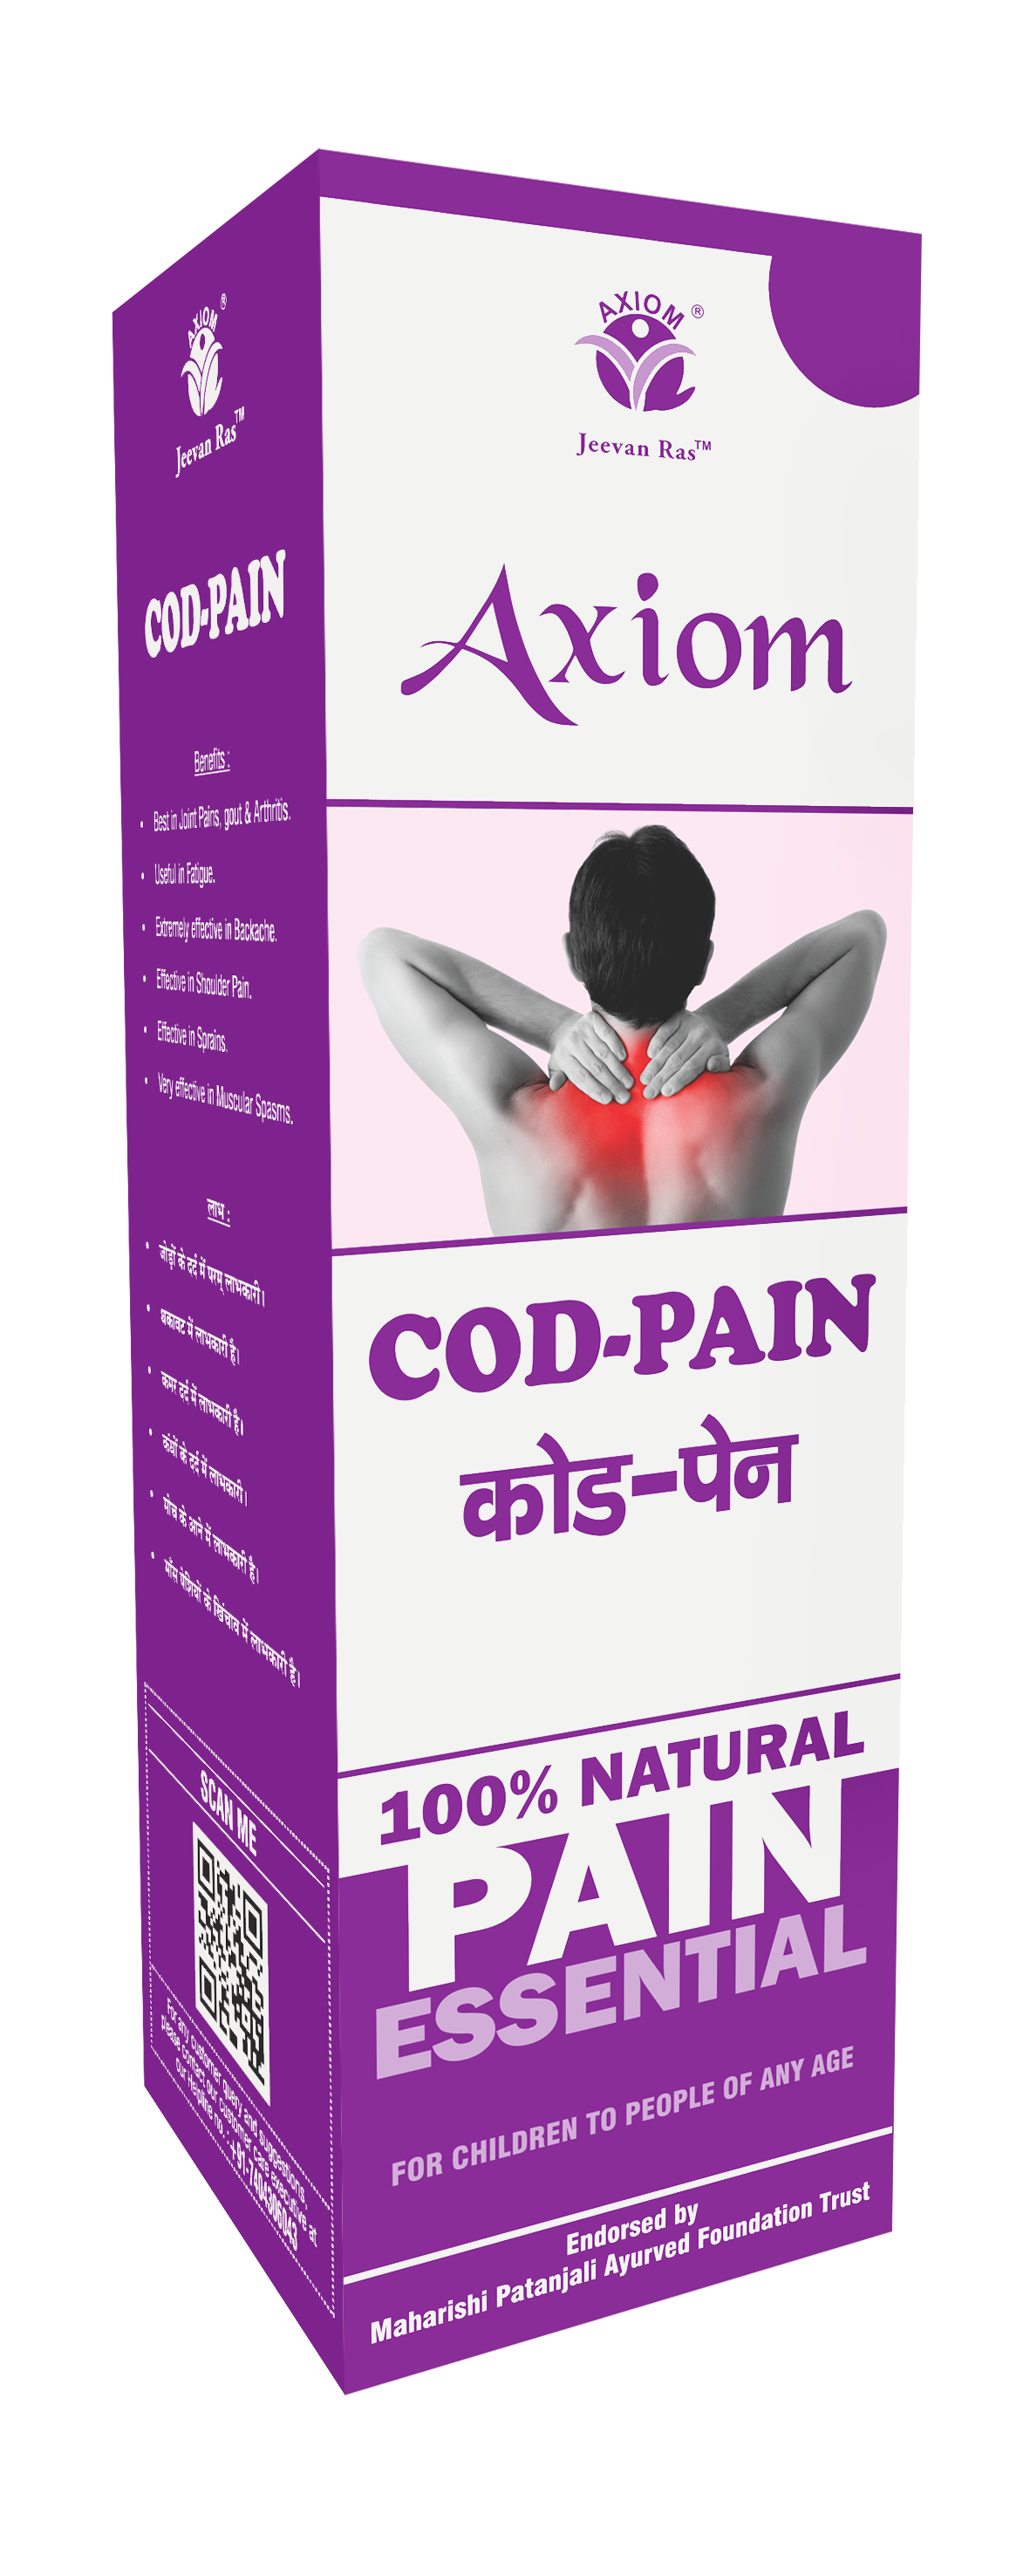 Buy Axiom COD-Pain at Best Price Online